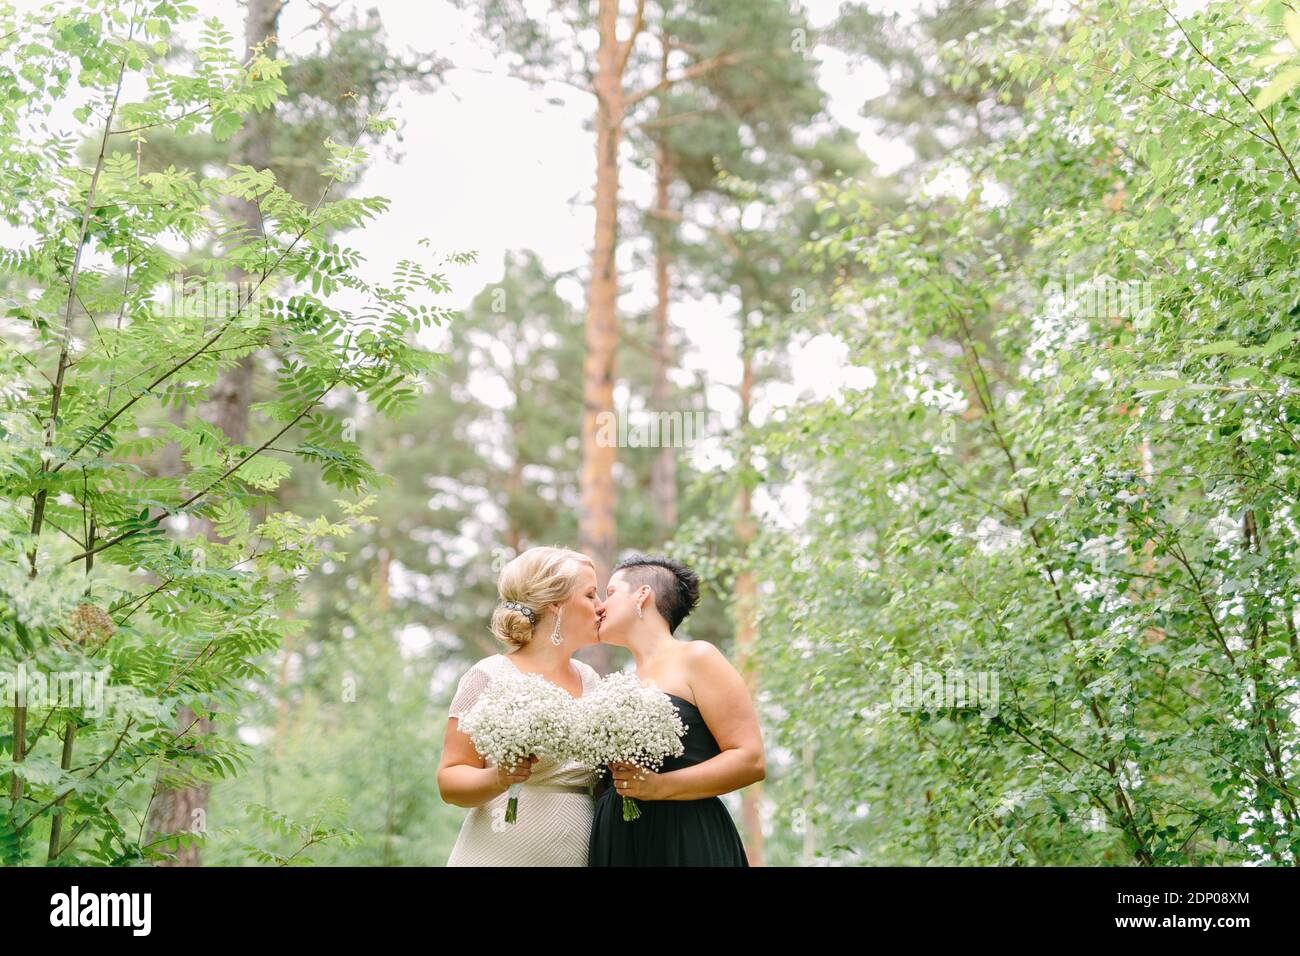 Brides in wedding dresses kissing Stock Photo